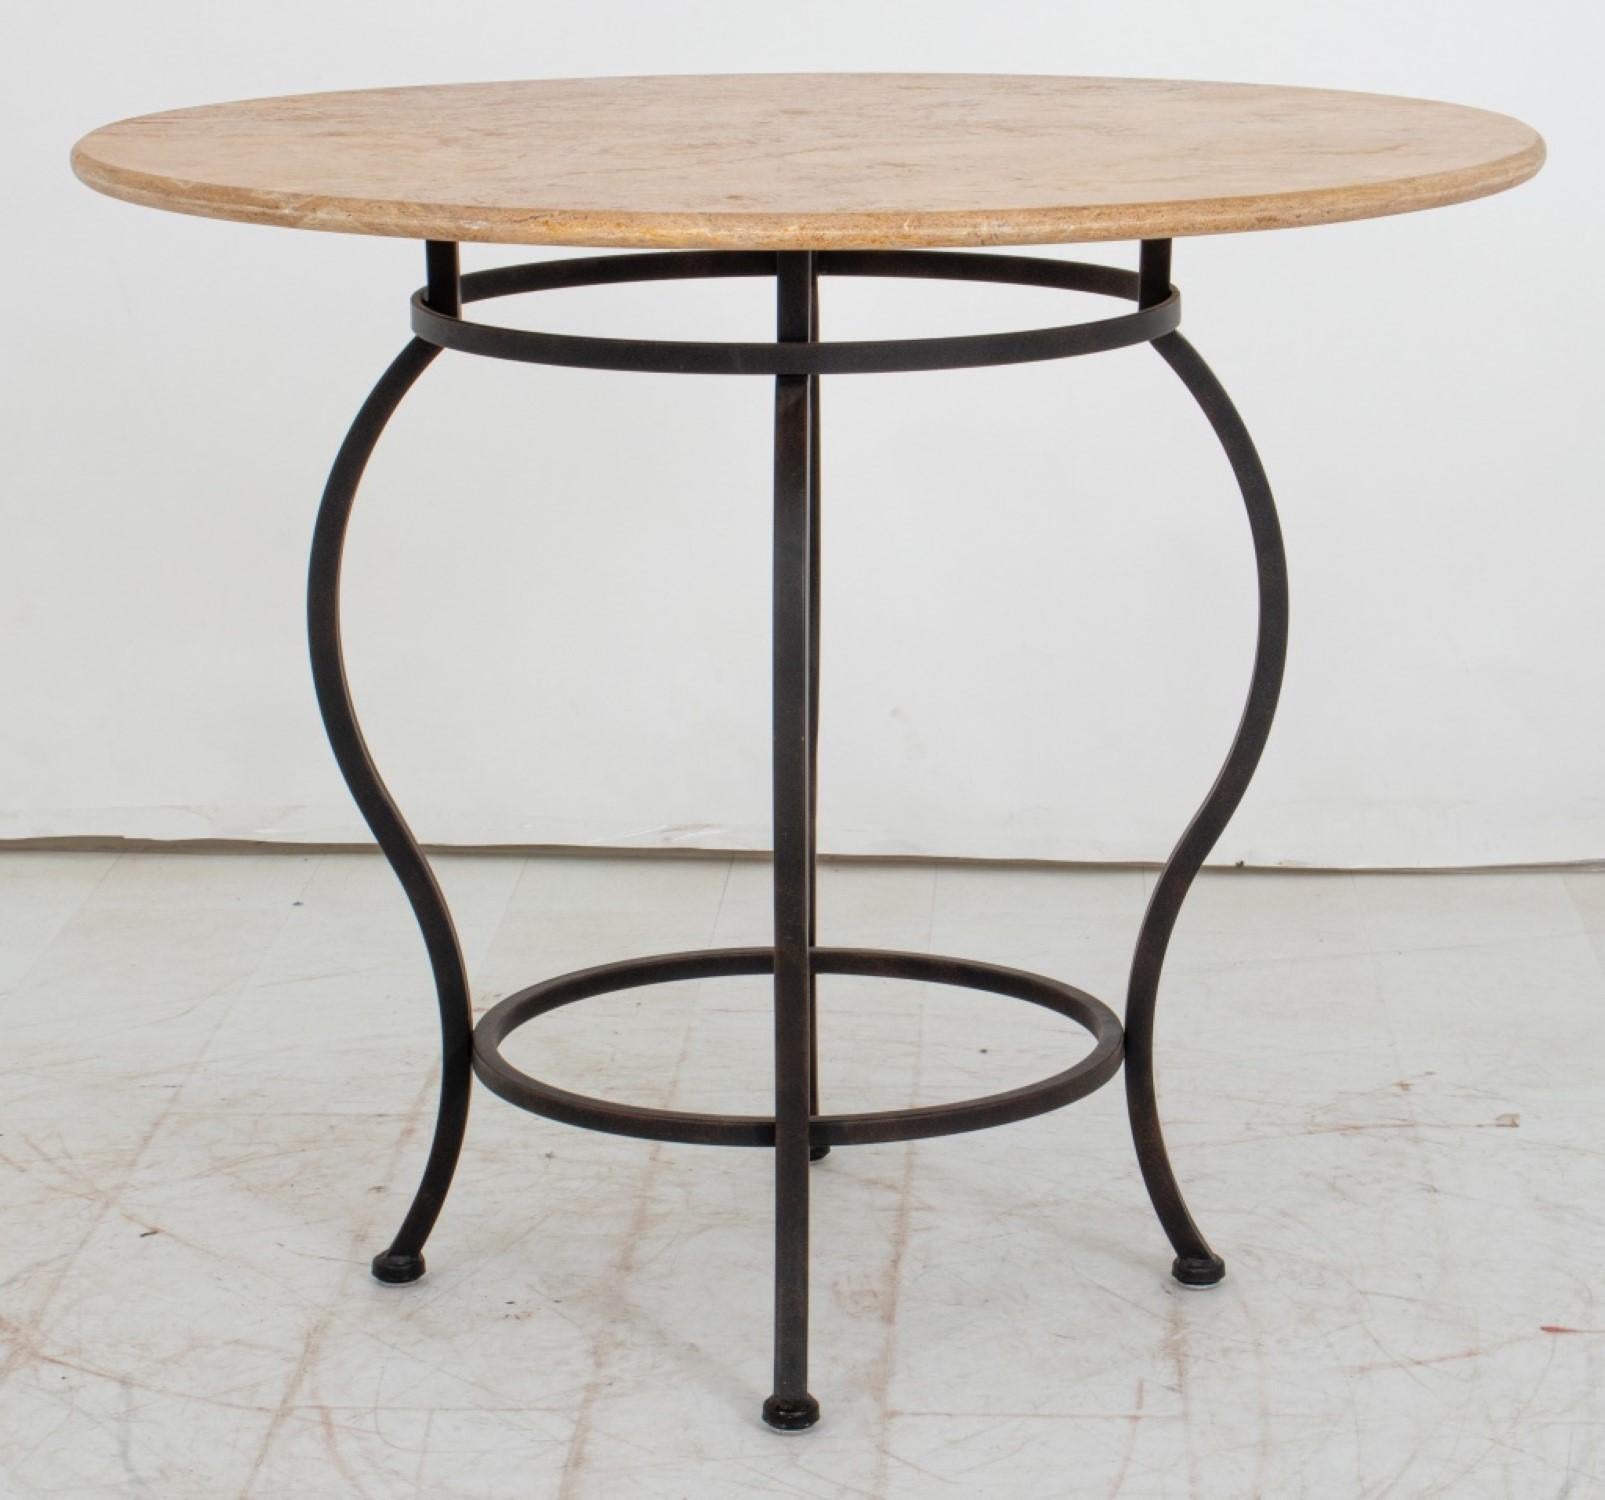 Modern Stone Top Center Table. Provenance: From the 50 East 89th Street estate of a 20th-century photography collector.

Dealer: S138XX